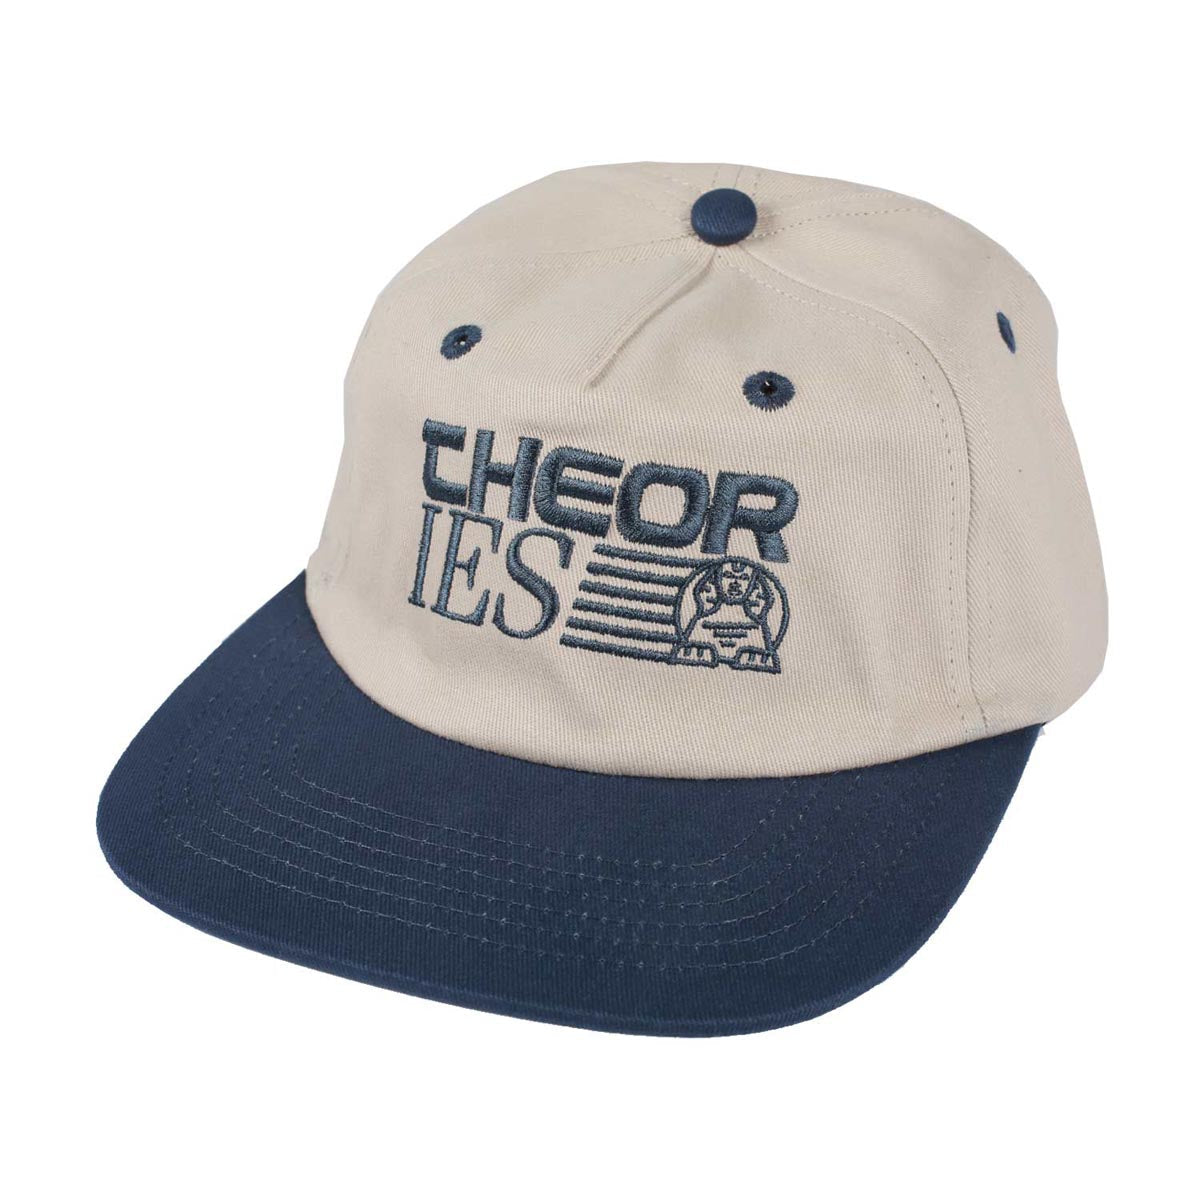 Theories New Generation Hat - Ivory/Slate Blue image 1